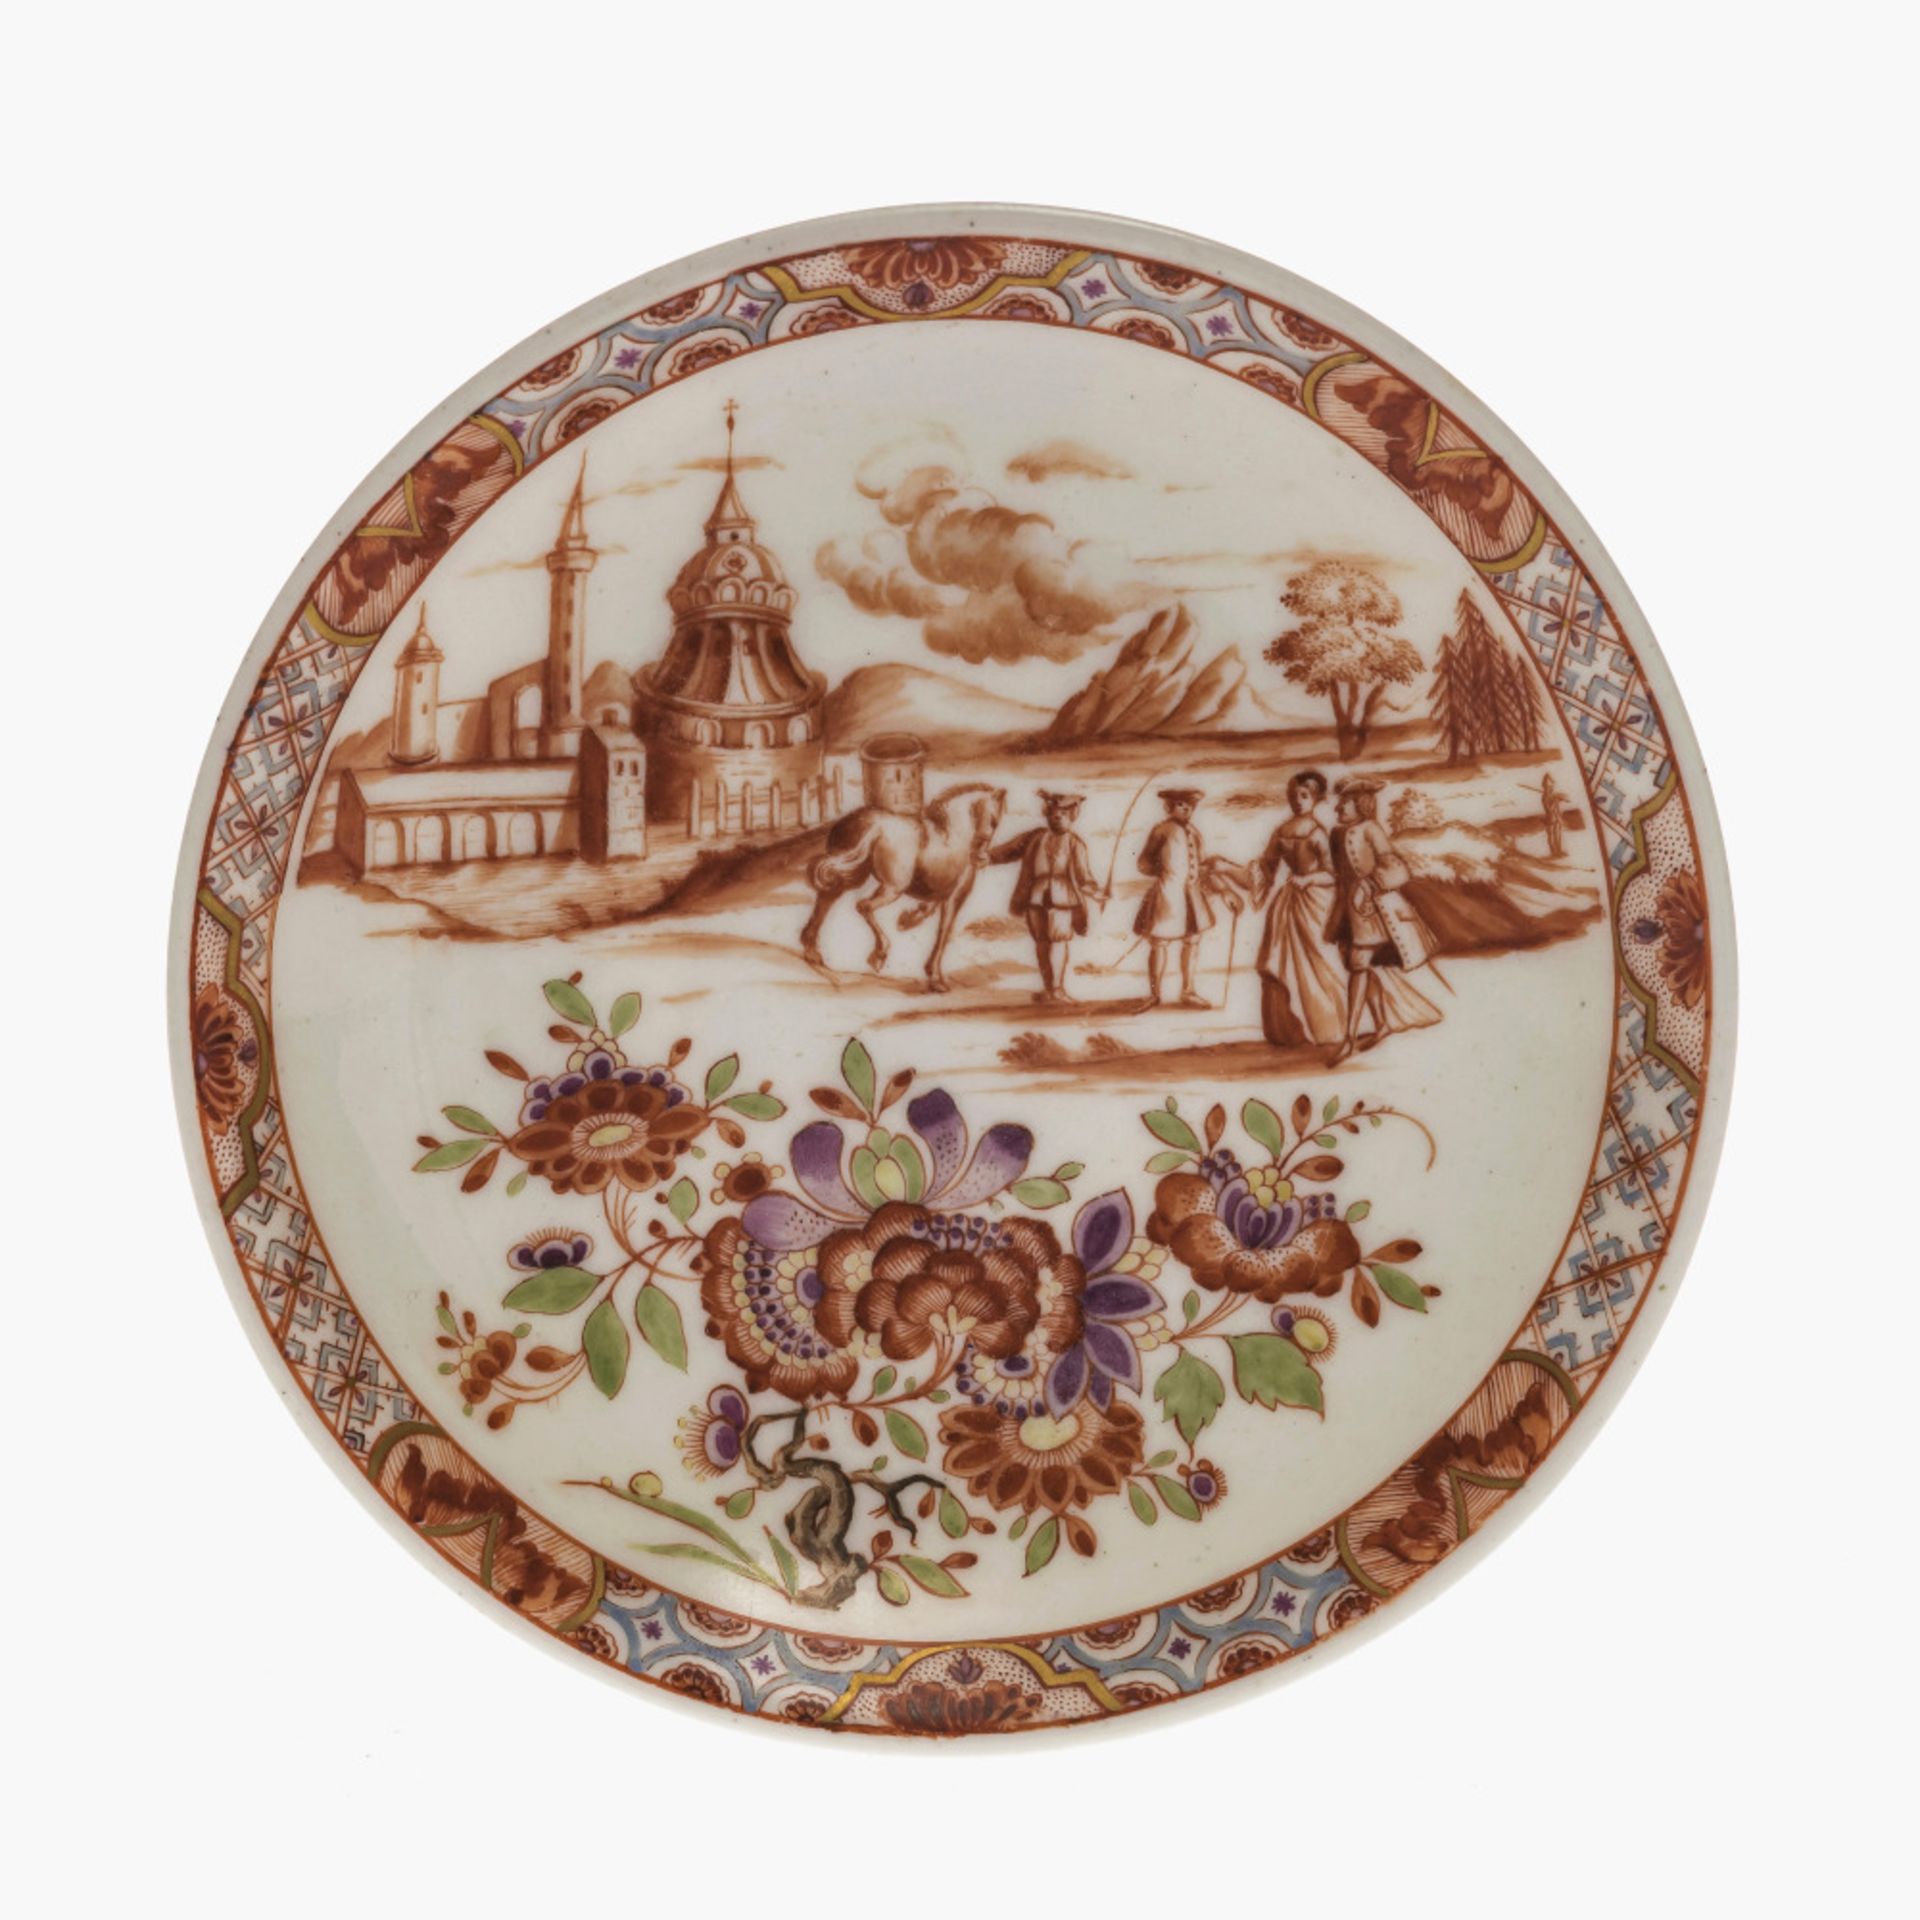 A saucer - Meissen, circa 1725, painting probably from the workshop of Johann Gregorius Hoeroldt